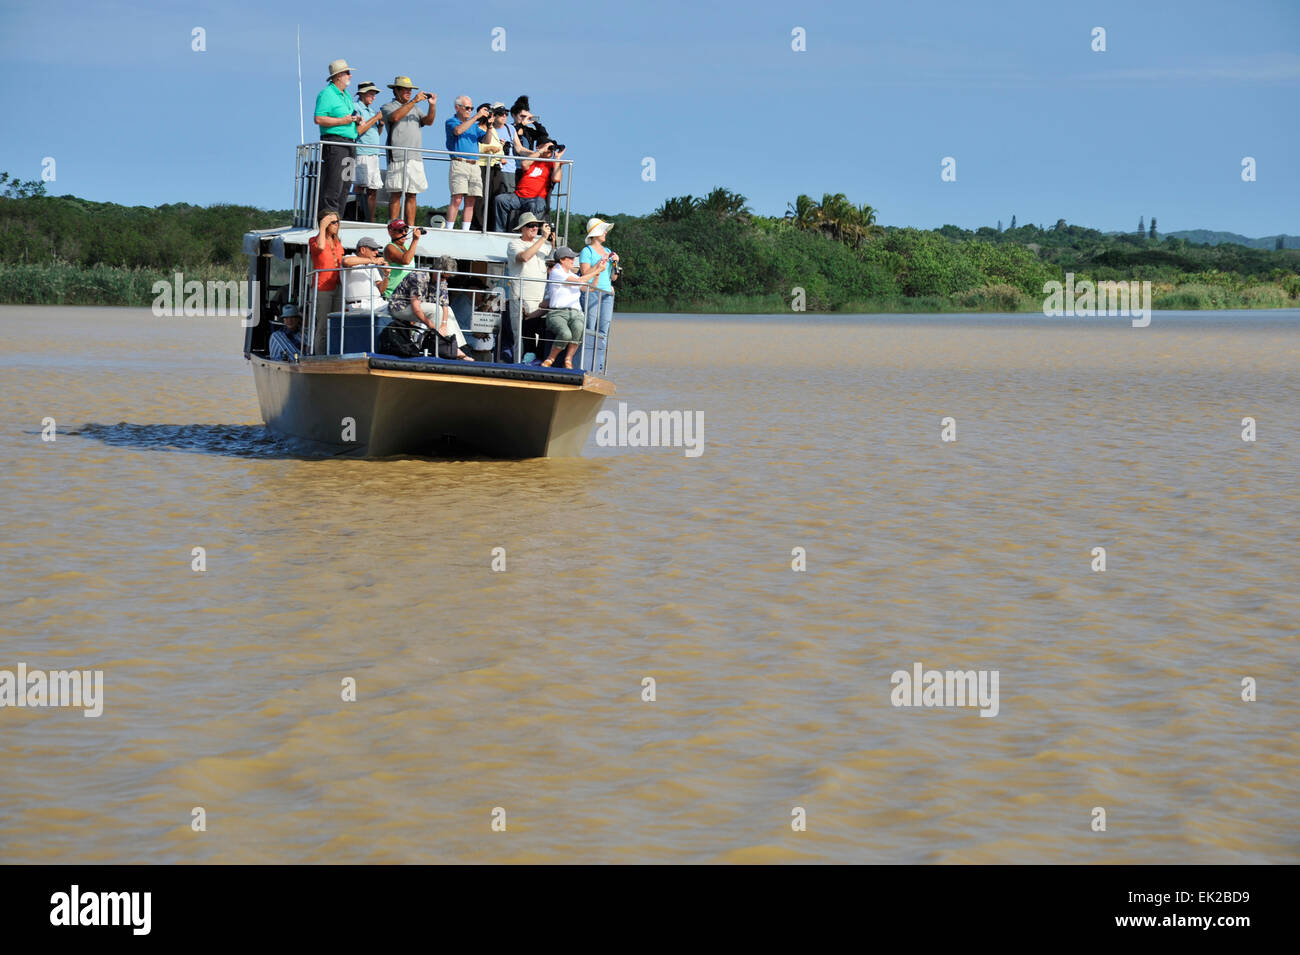 St Lucia, KwaZulu-Natal, South Africa, group of people standing on deck of tourist boat, viewing wildlife, iSimangoliso World Heritage park, landscape Stock Photo